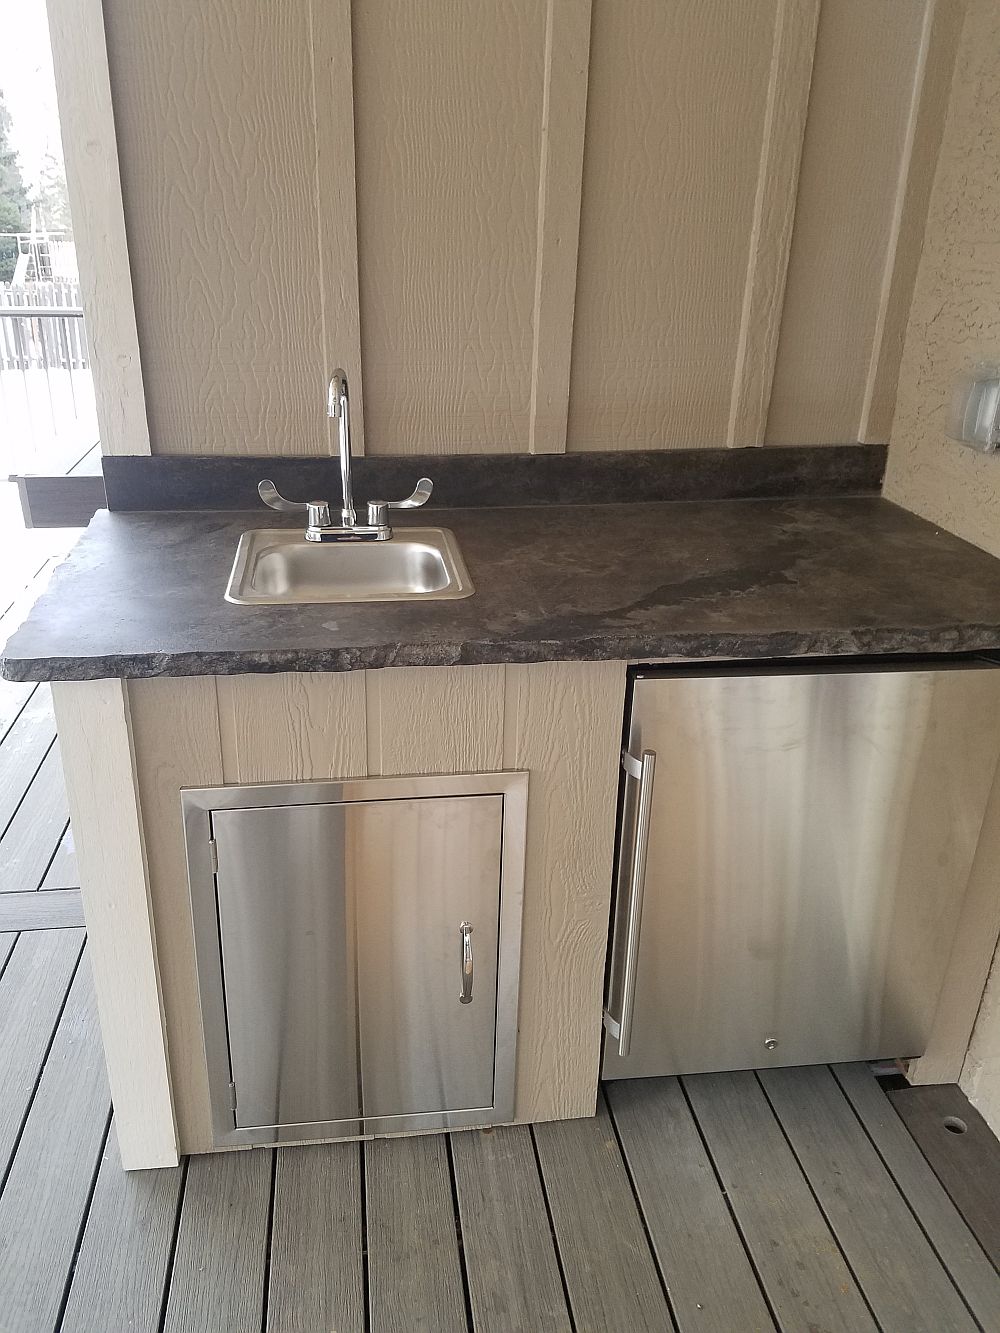 Mini outdoor kitchen with a fully-functioning sink, refrigerator, and granite countertop